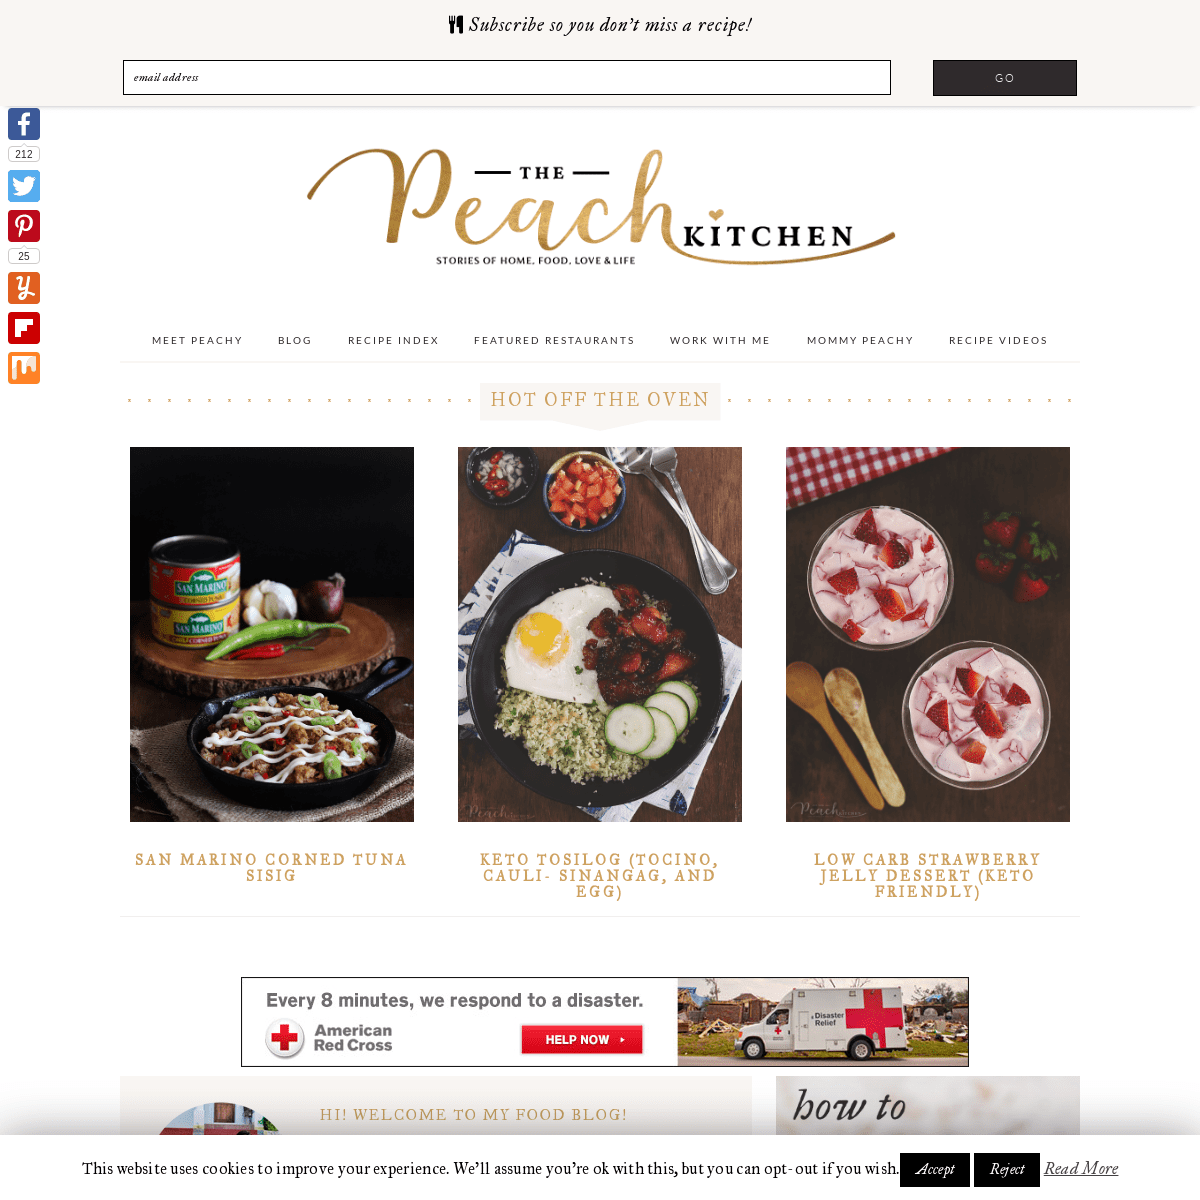 A complete backup of thepeachkitchen.com